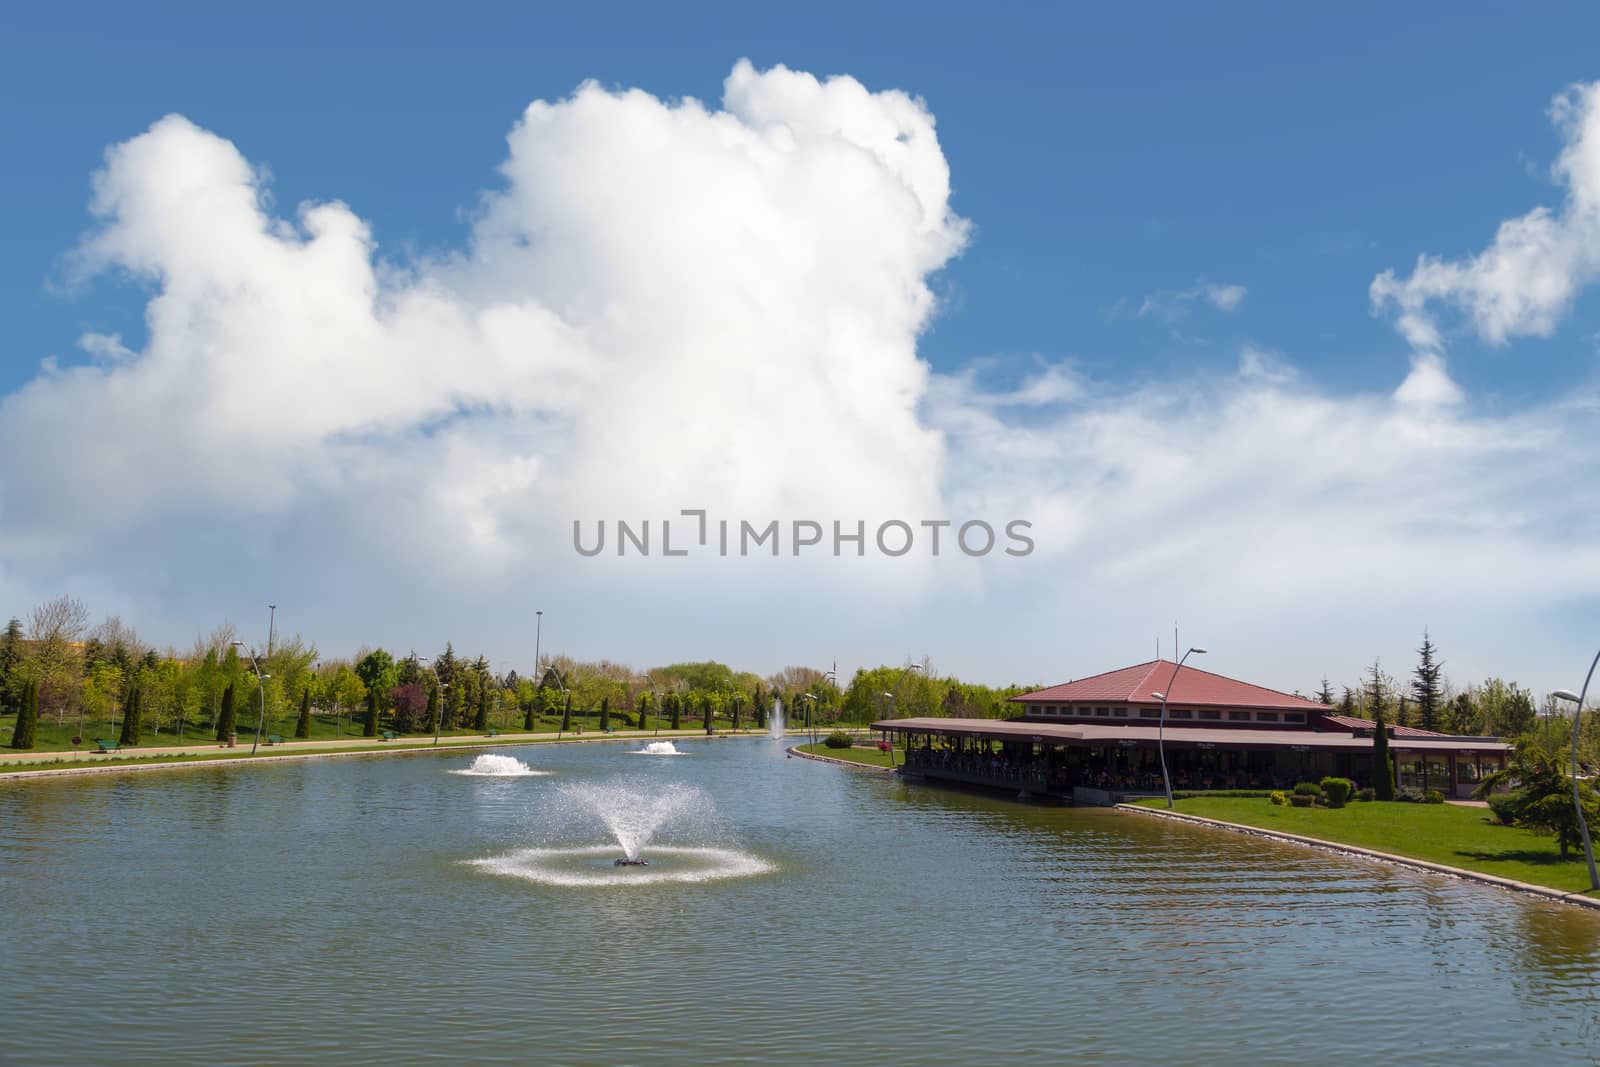 Landscape view of small lake around trees in Kentpark natural park in Eskisehir on blue sky background.